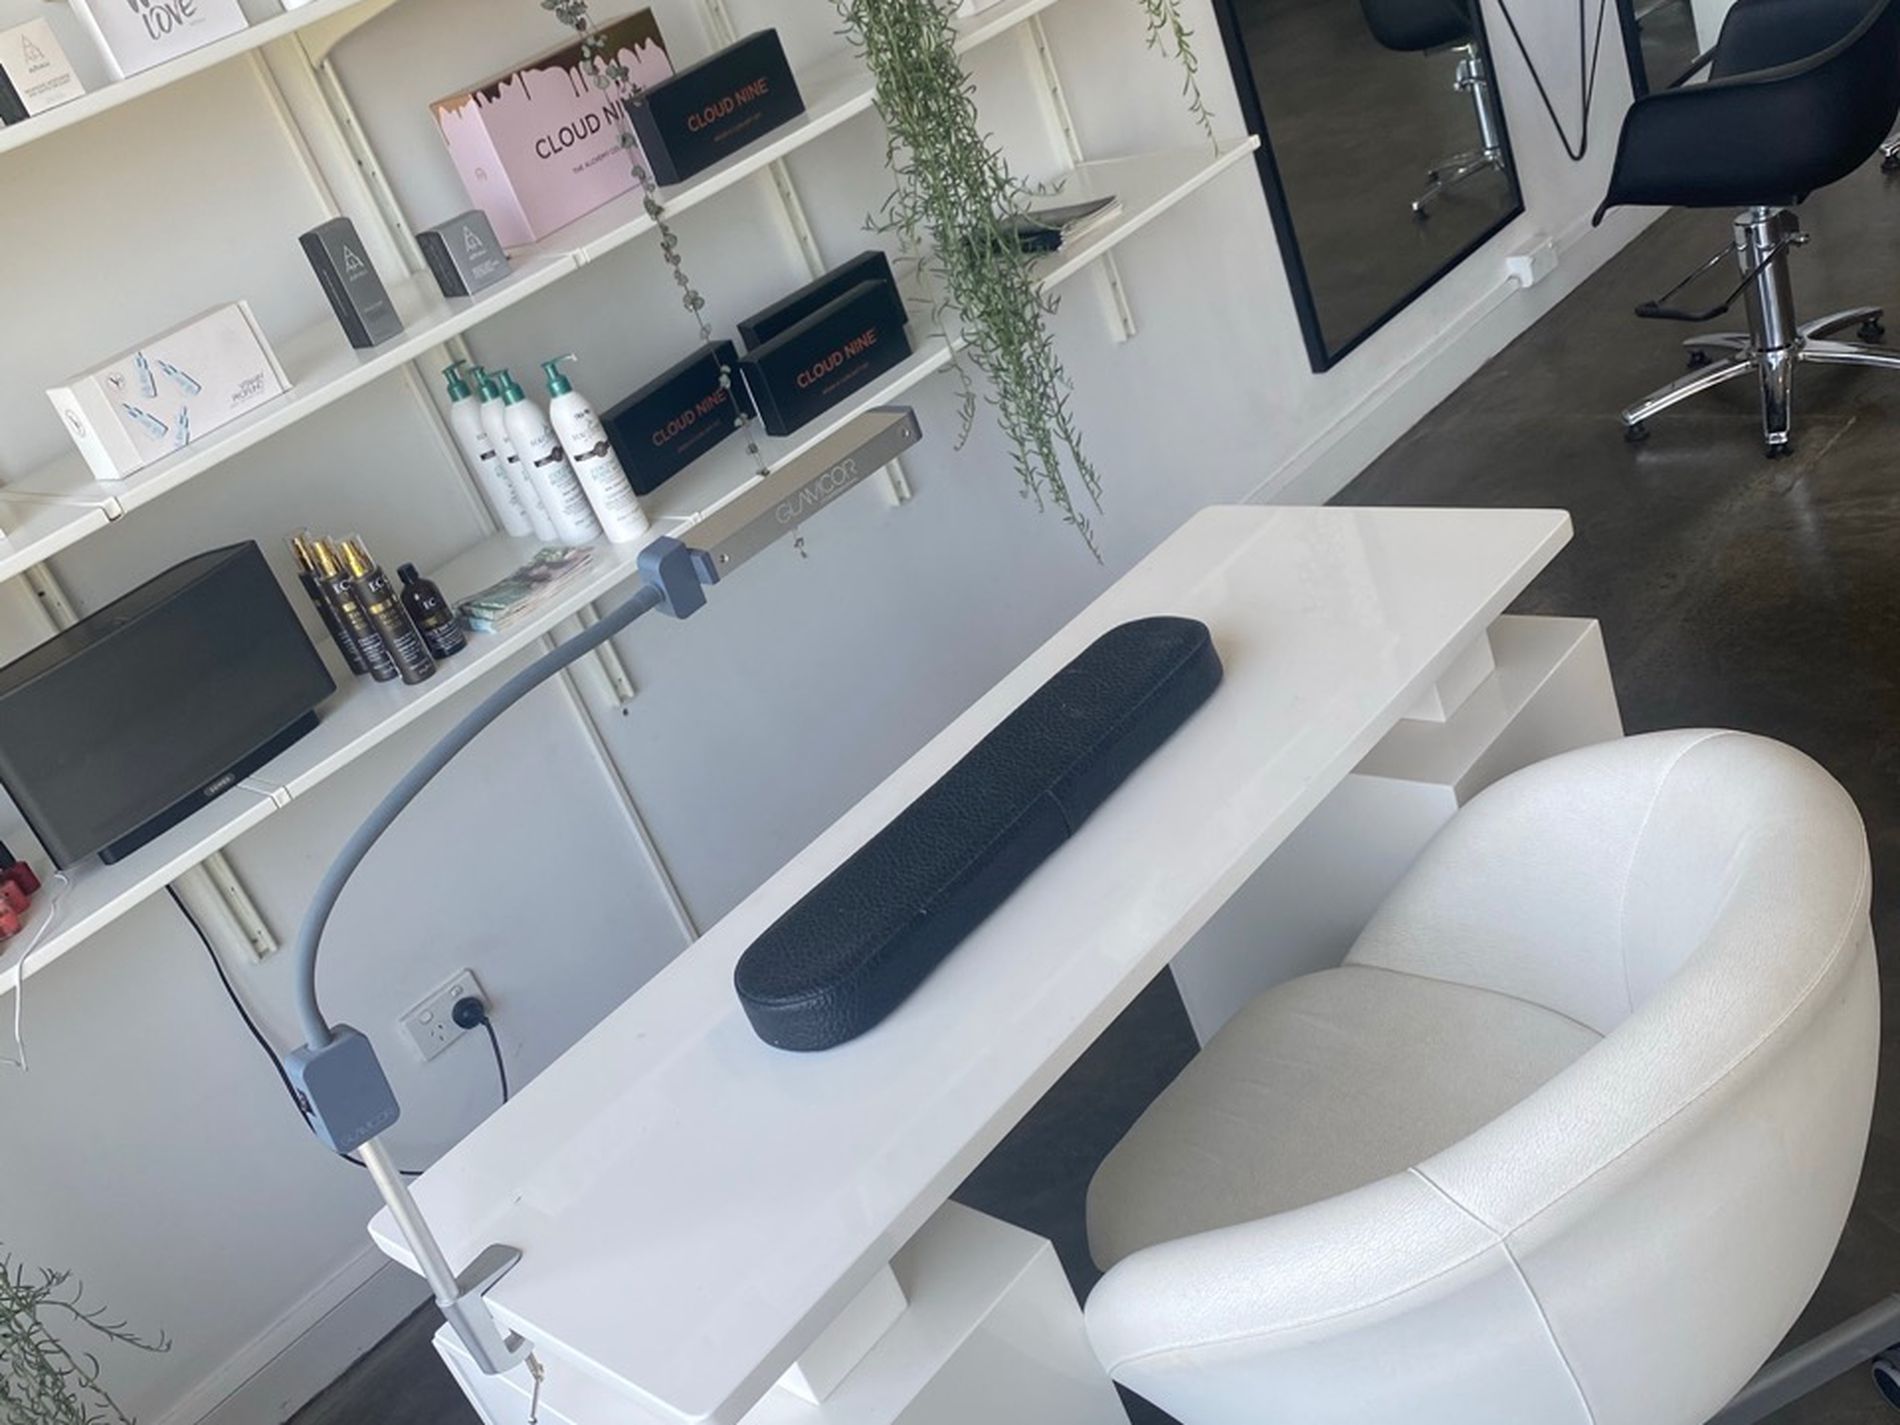 Hair and Beauty Salon Business for Sale Aspendale
